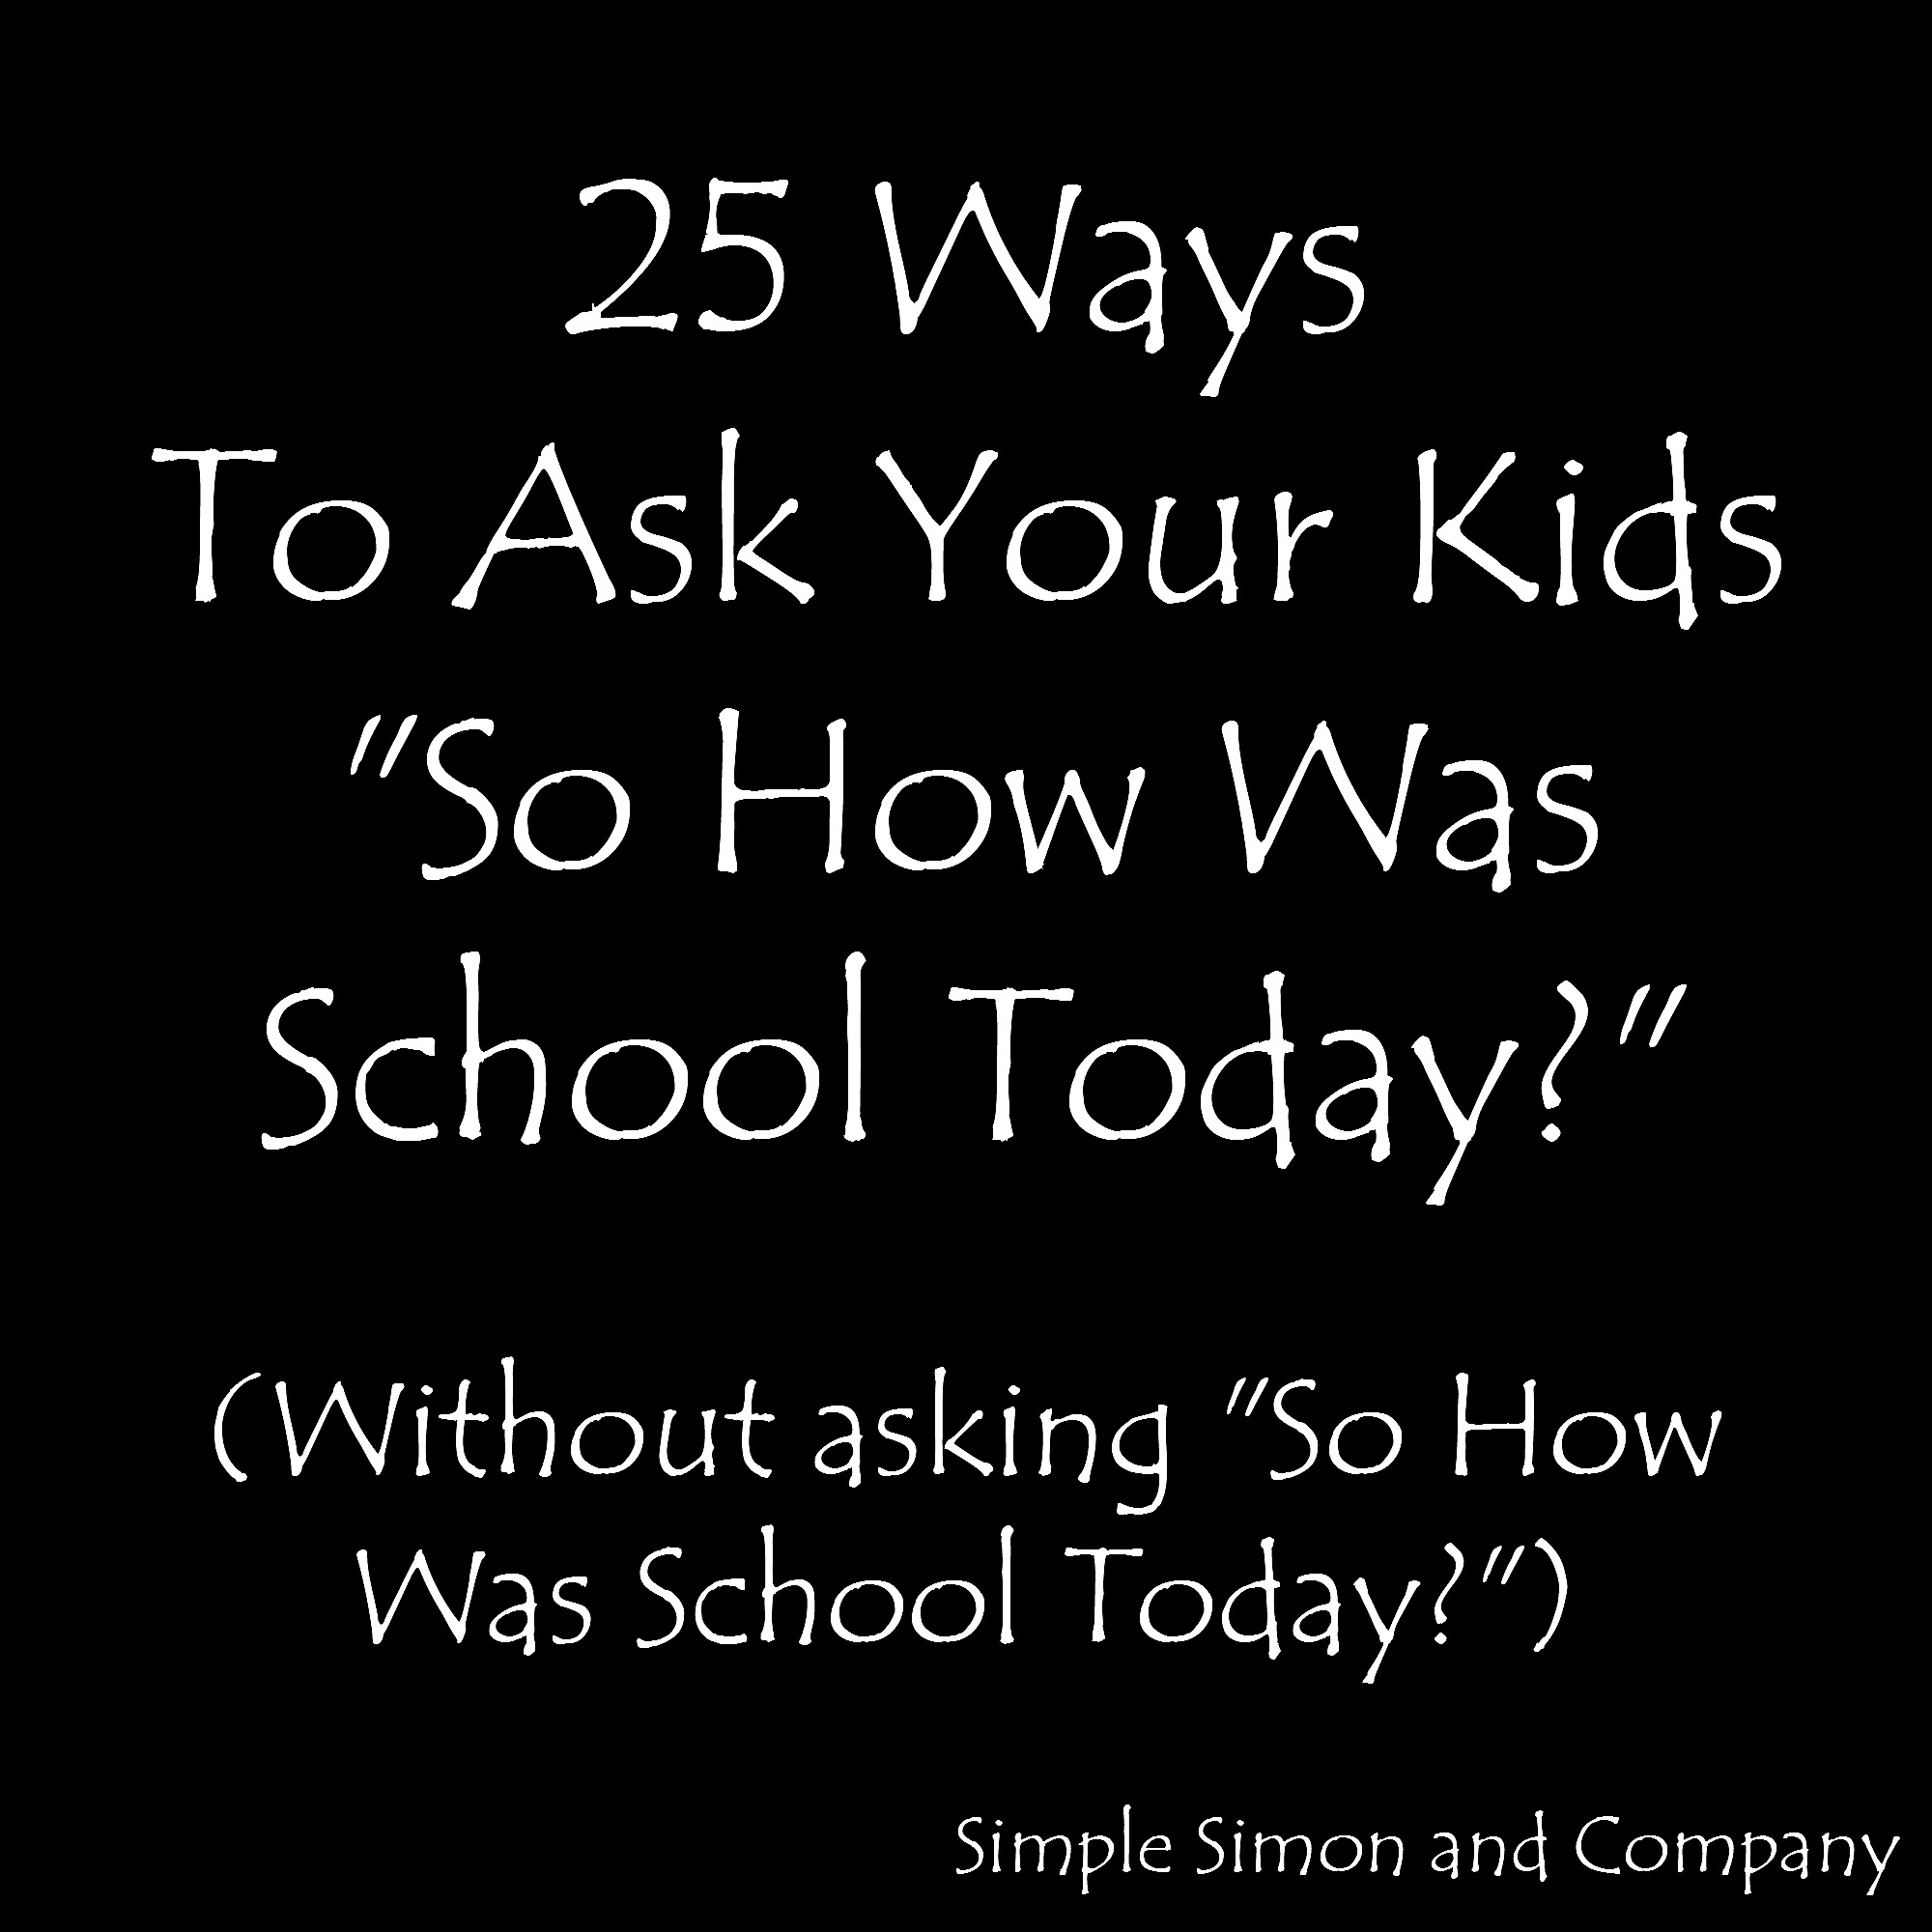 25 Ways To Ask Your Kids How Was School Today